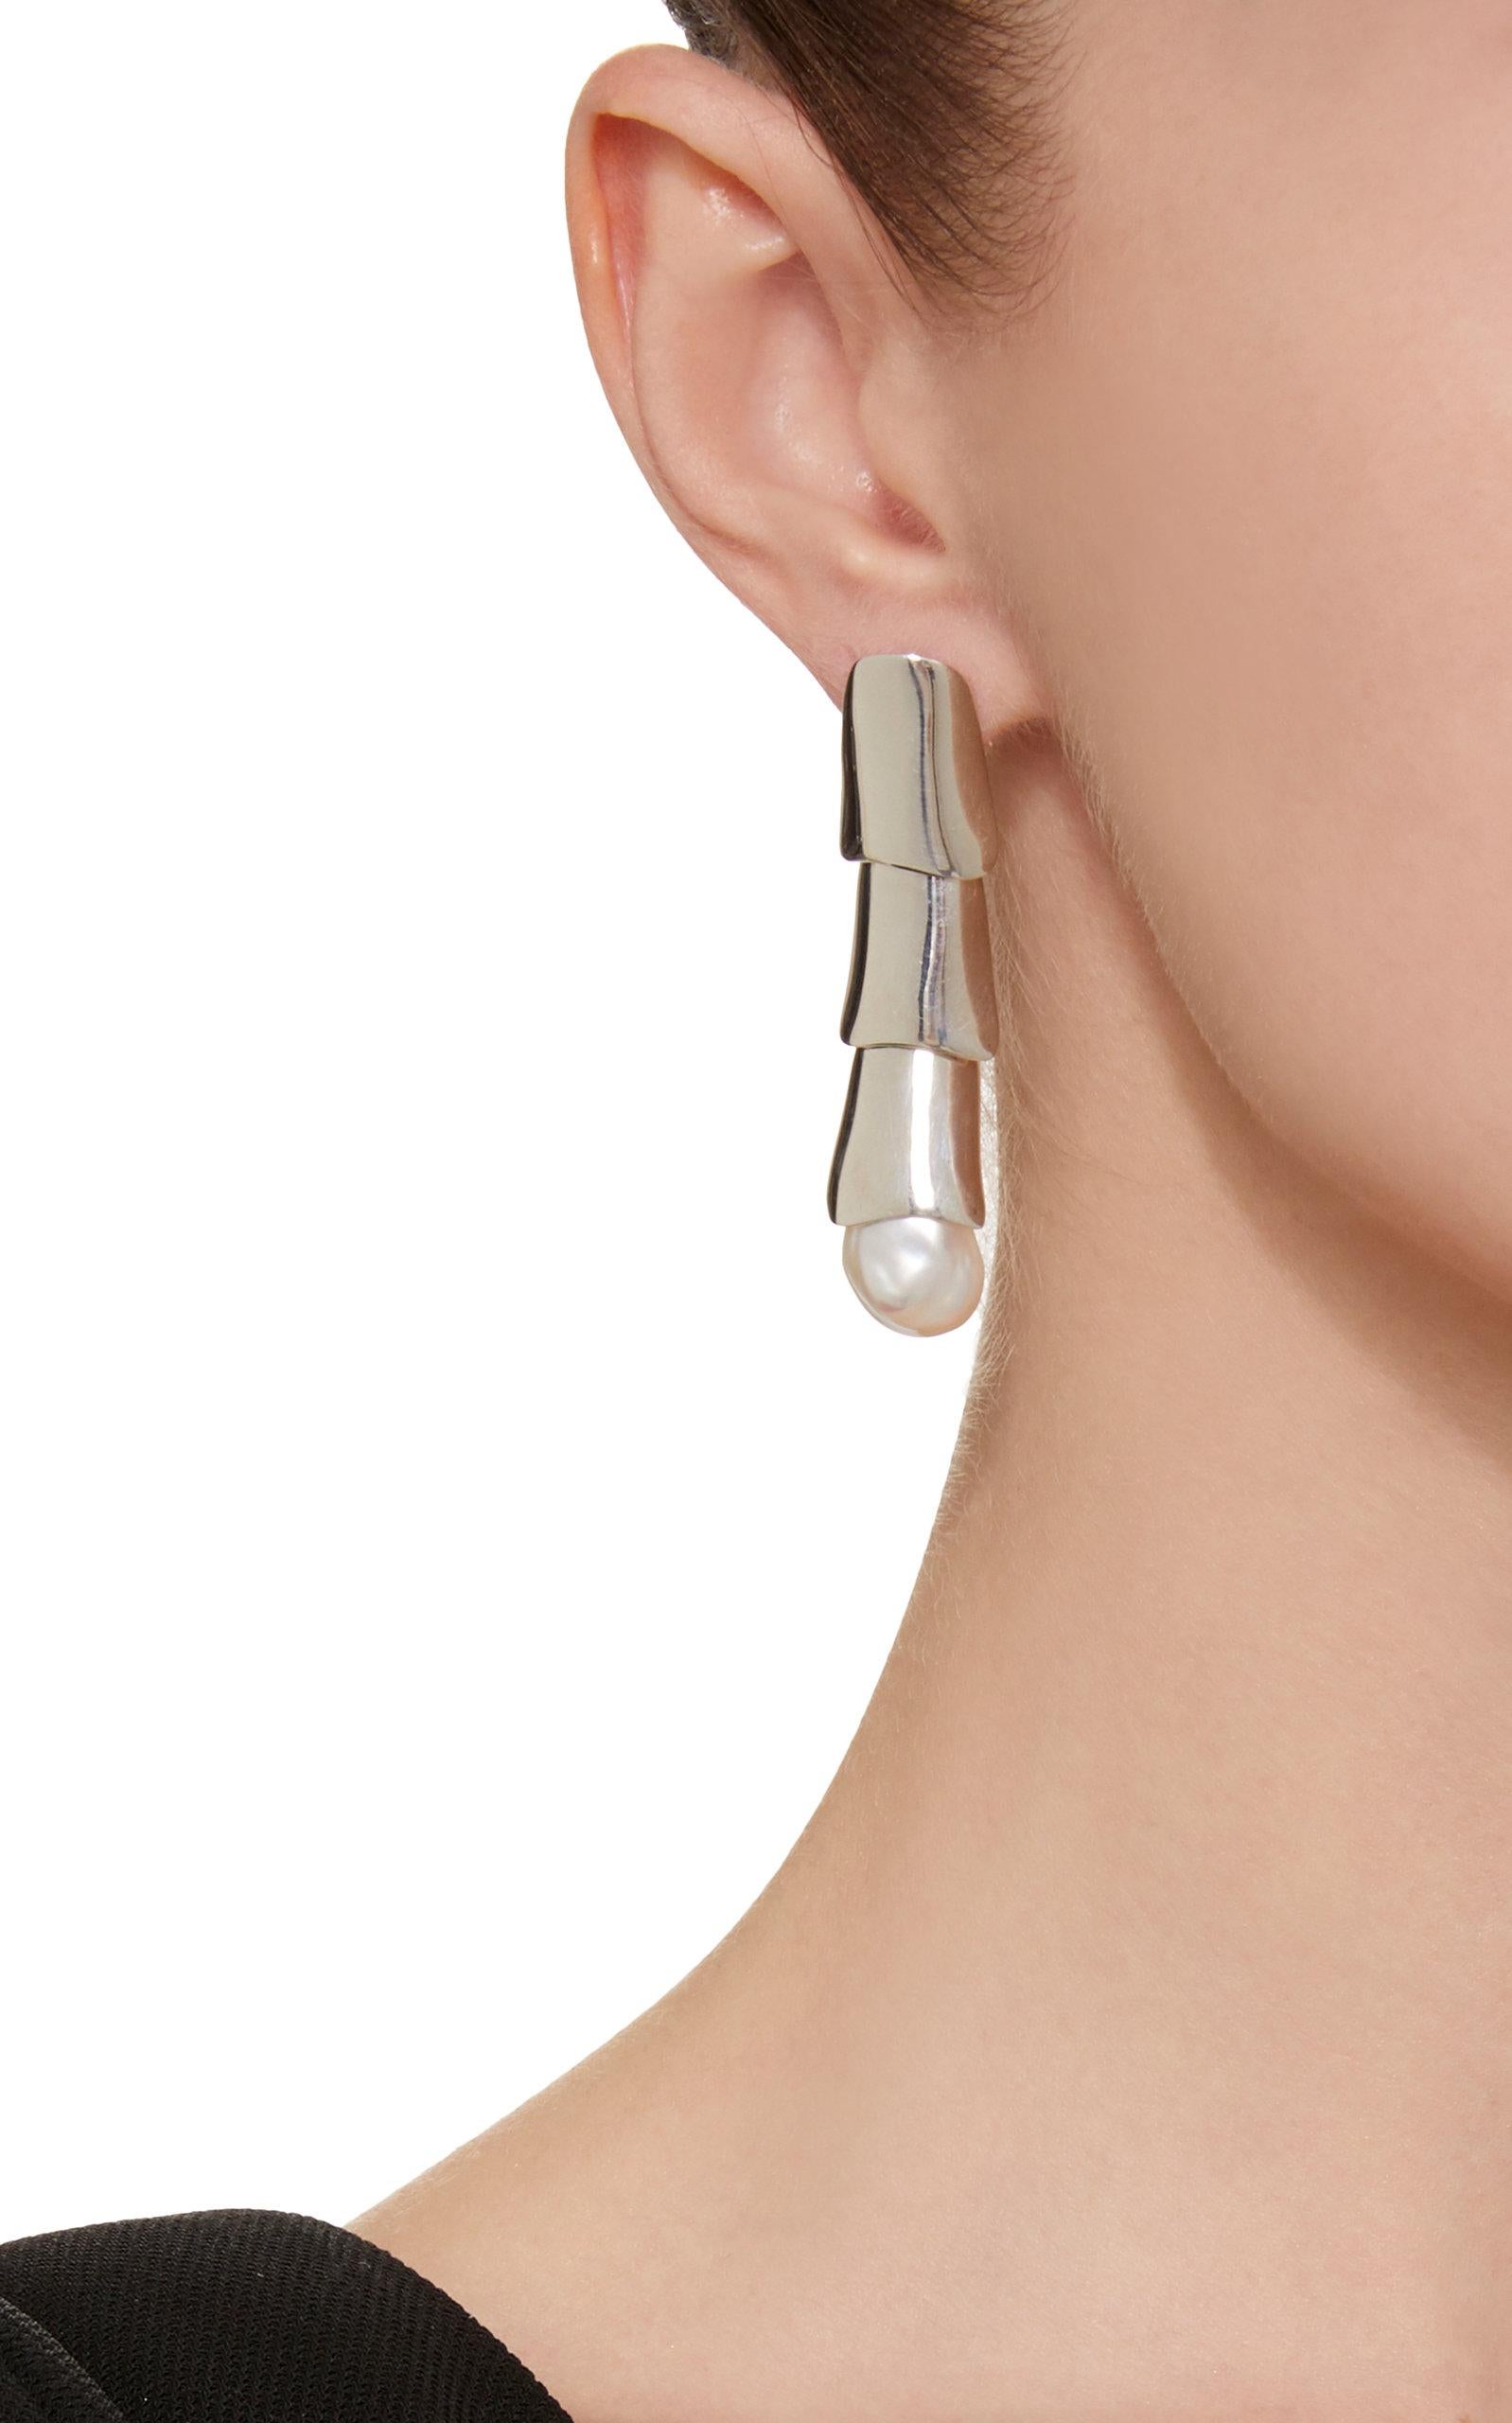 AGMES Sterling Silver Layered Drop Dangle Earrings with Freshwater Pearls.
Sterling Silver post.
Also available in Gold Vermeil.
Handmade in New York City.
Inspired by urban landscapes, architecture and modern art, the collection creates a feminine